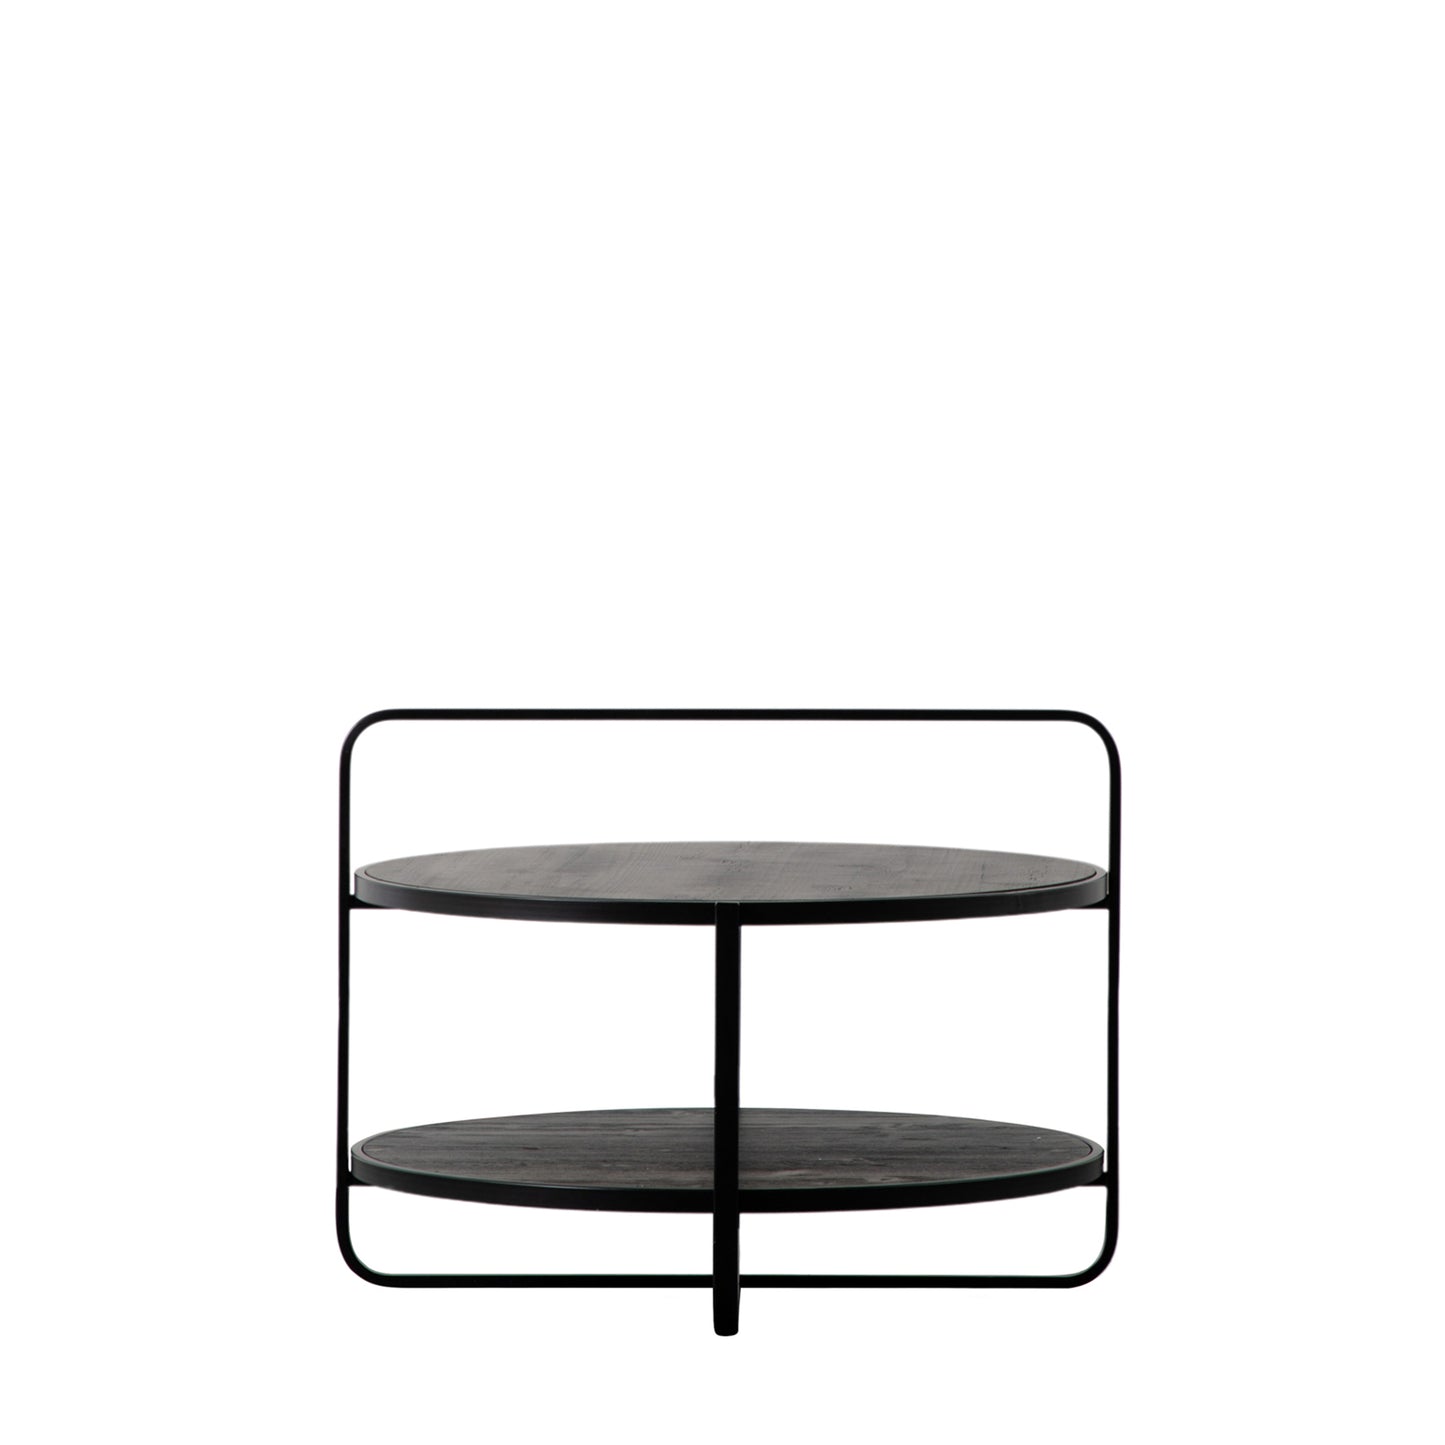 A black coffee table with two shelves for interior decor and home furniture.